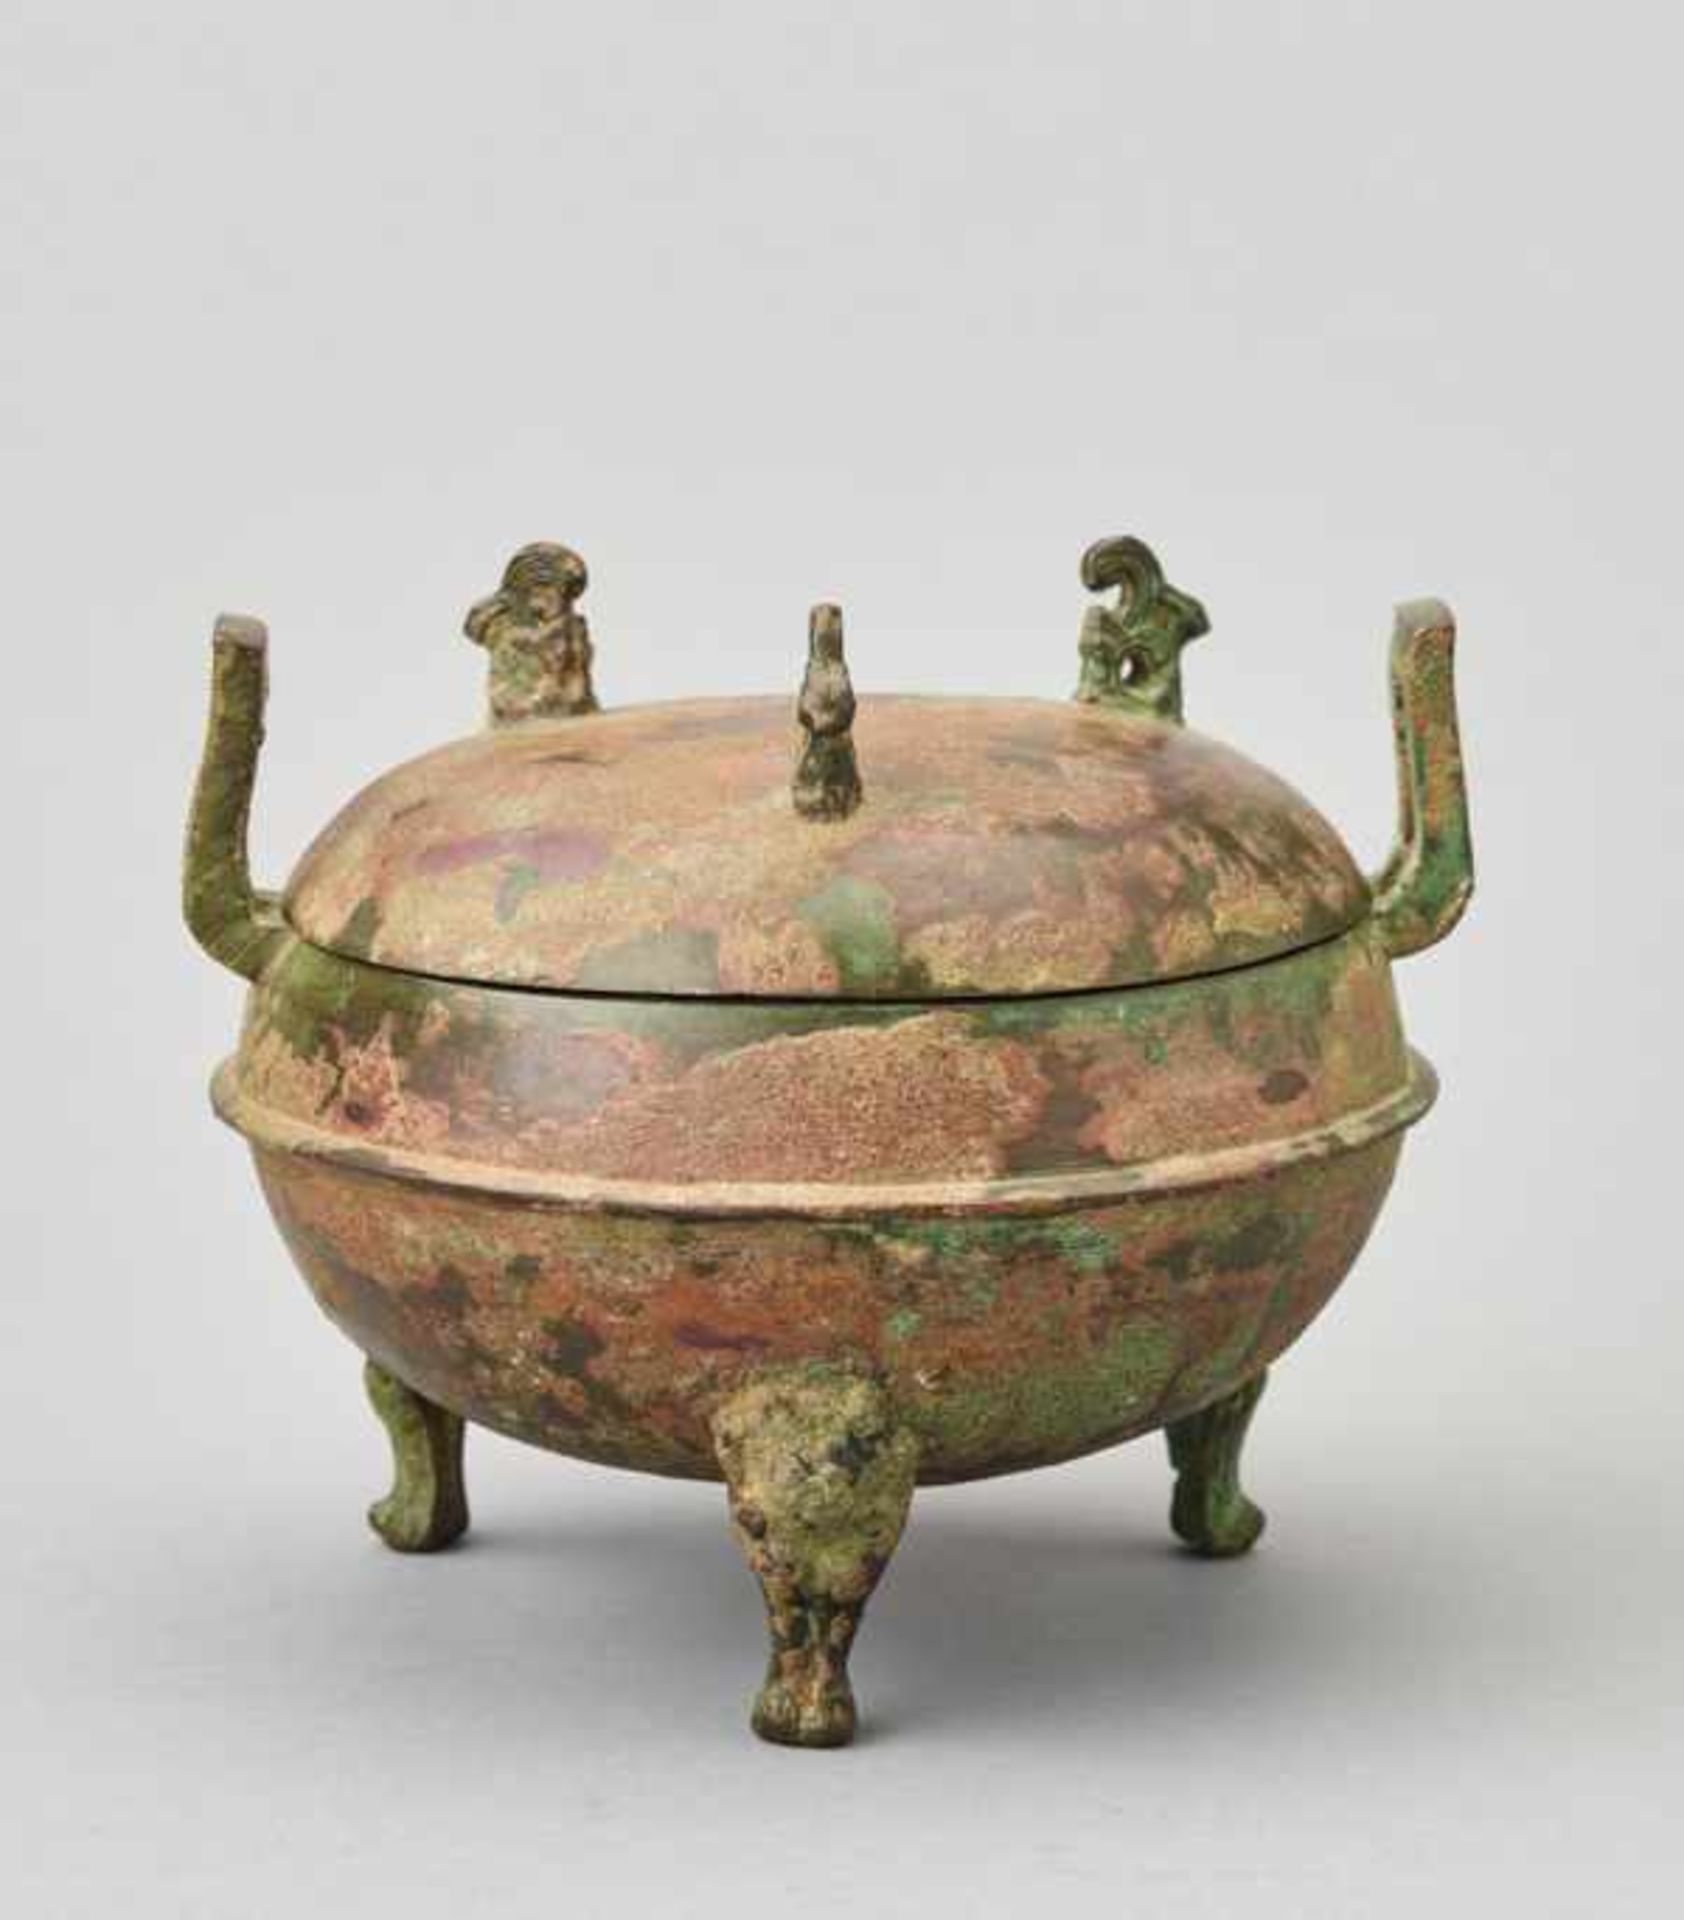 A ‘MYTHICAL ANIMALS AND BIRDS’ BRONZE RITUAL VESSEL AND COVER, DING, HAN DYNASTY Cast bronze of